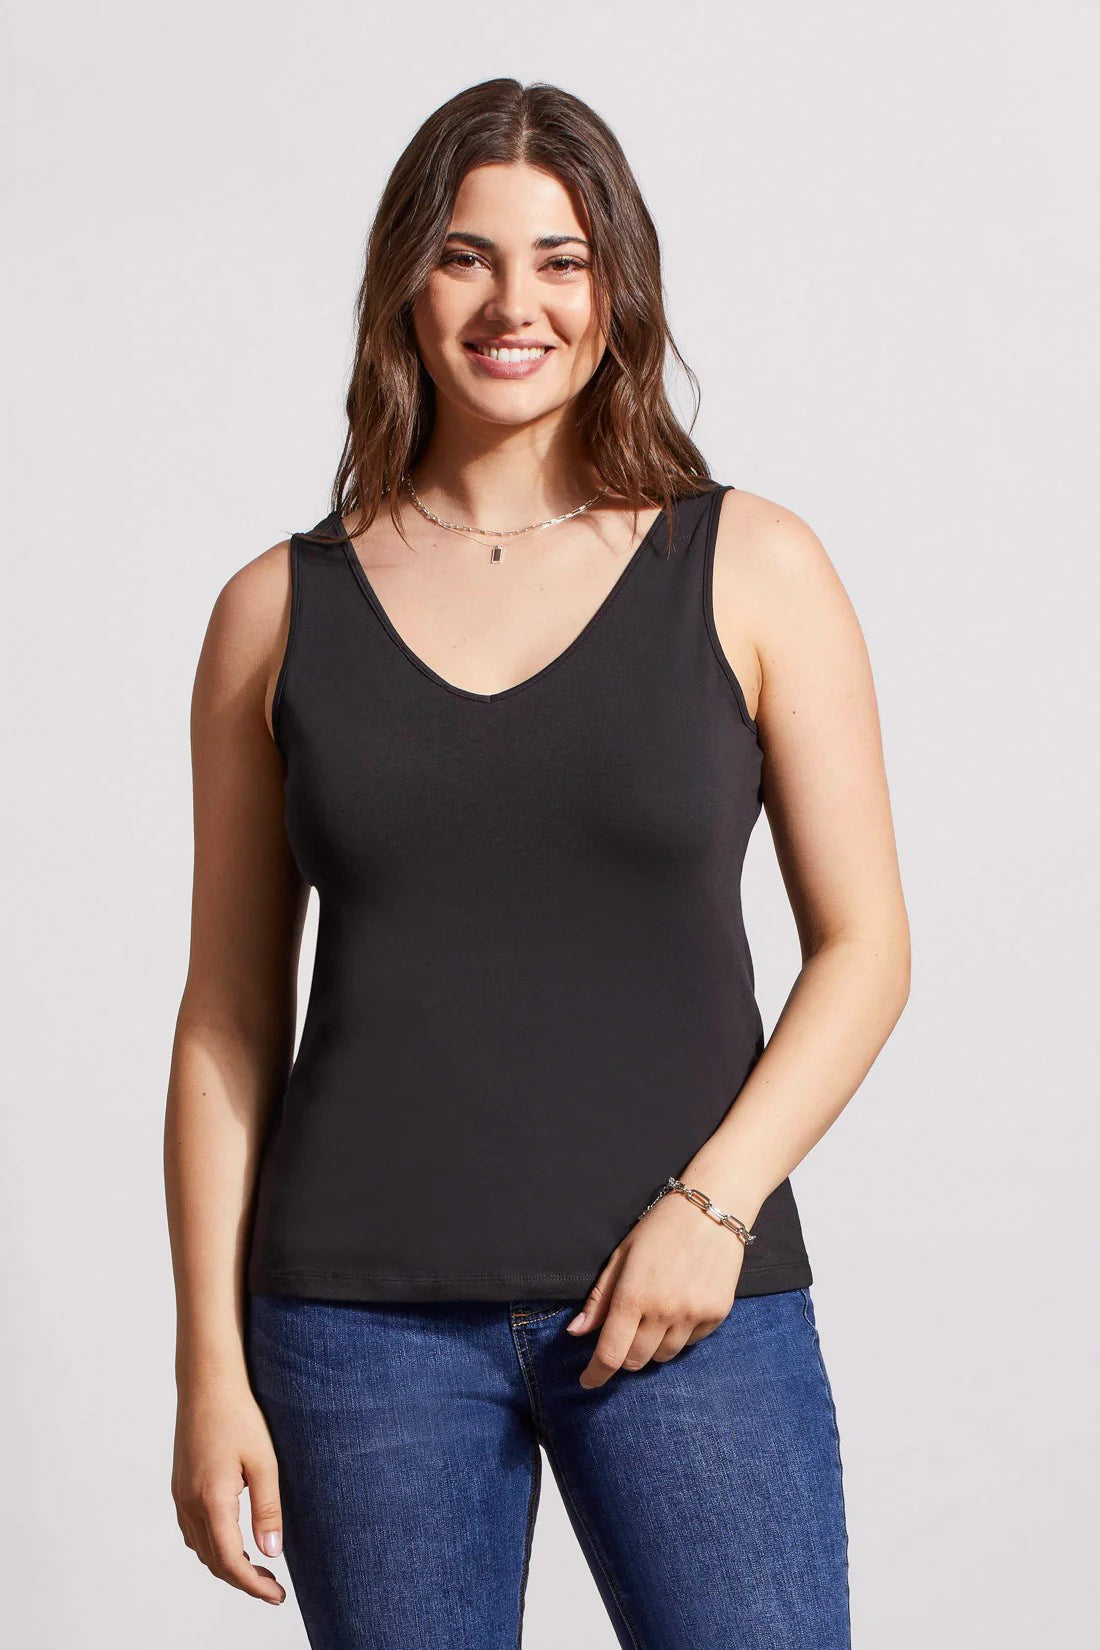 Say hello to the ultimate layering piece. This cami is a wardrobe essential with a versatile design that lets you wear it two ways. 